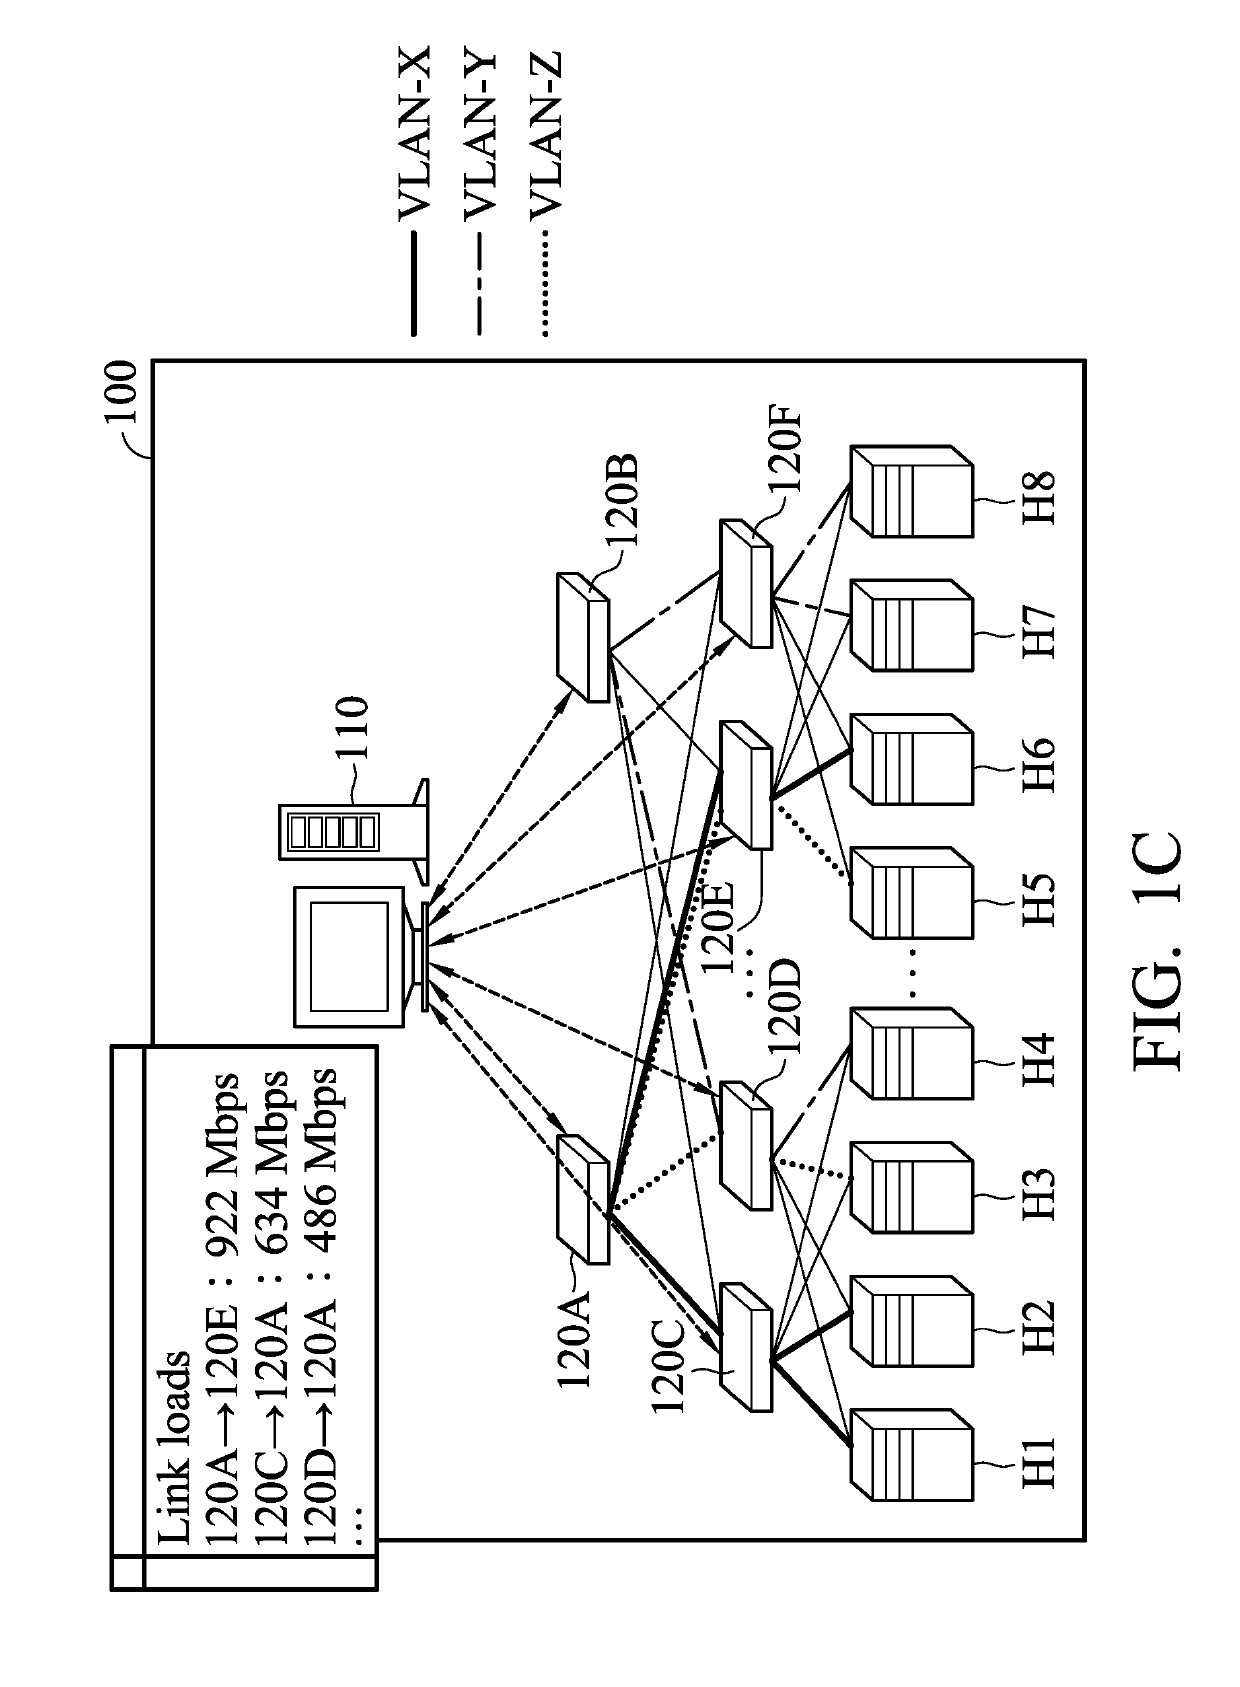 Method and device for monitoring traffic in a network